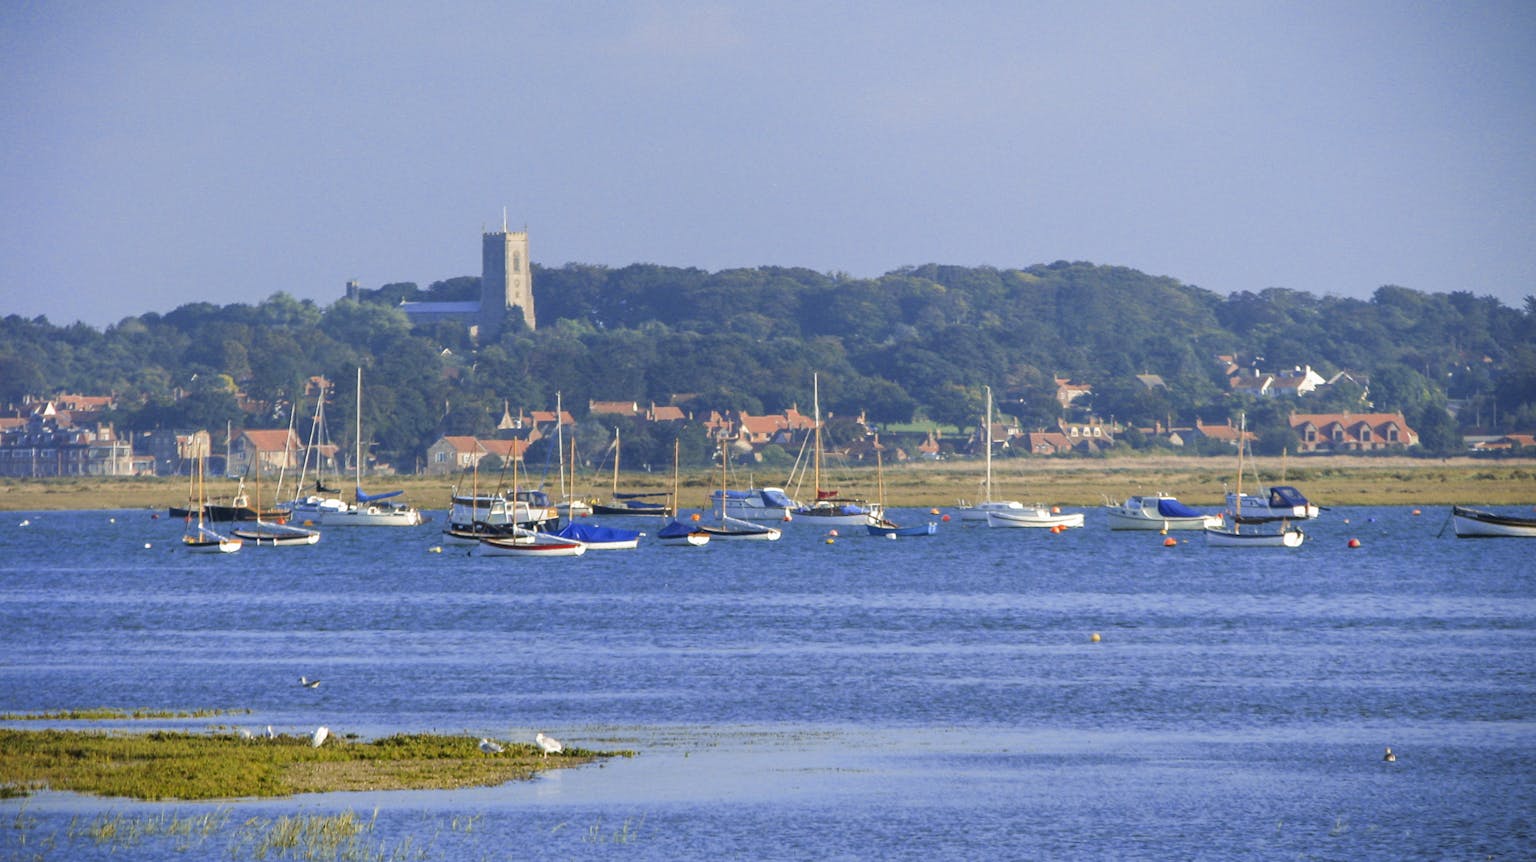 A view of one of the North Norfolk Conservation Areas, Blakeney